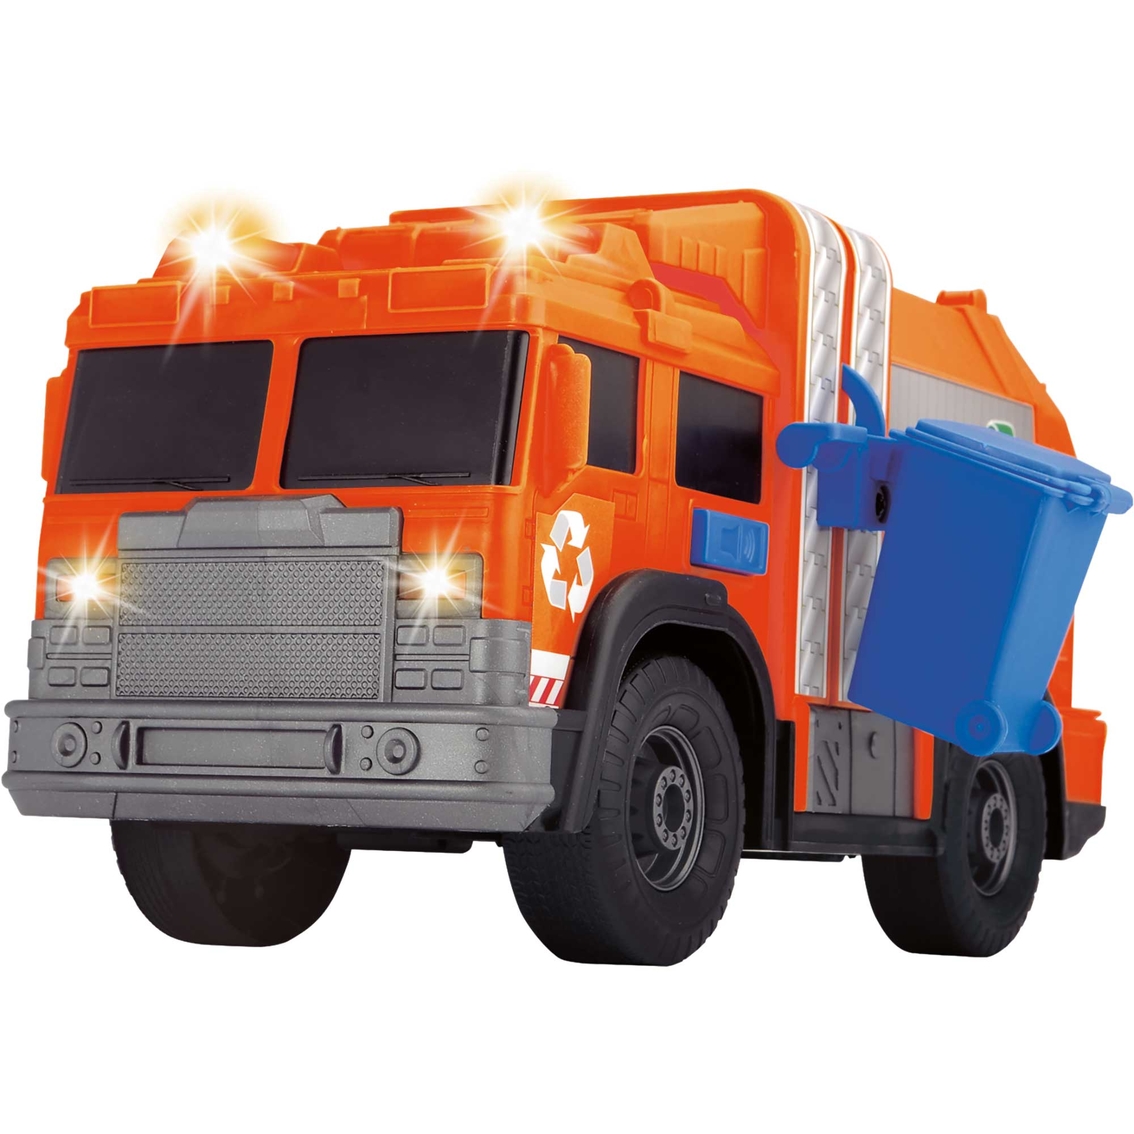 Dickie Toys Light and Sound Recycle Truck - Image 2 of 4